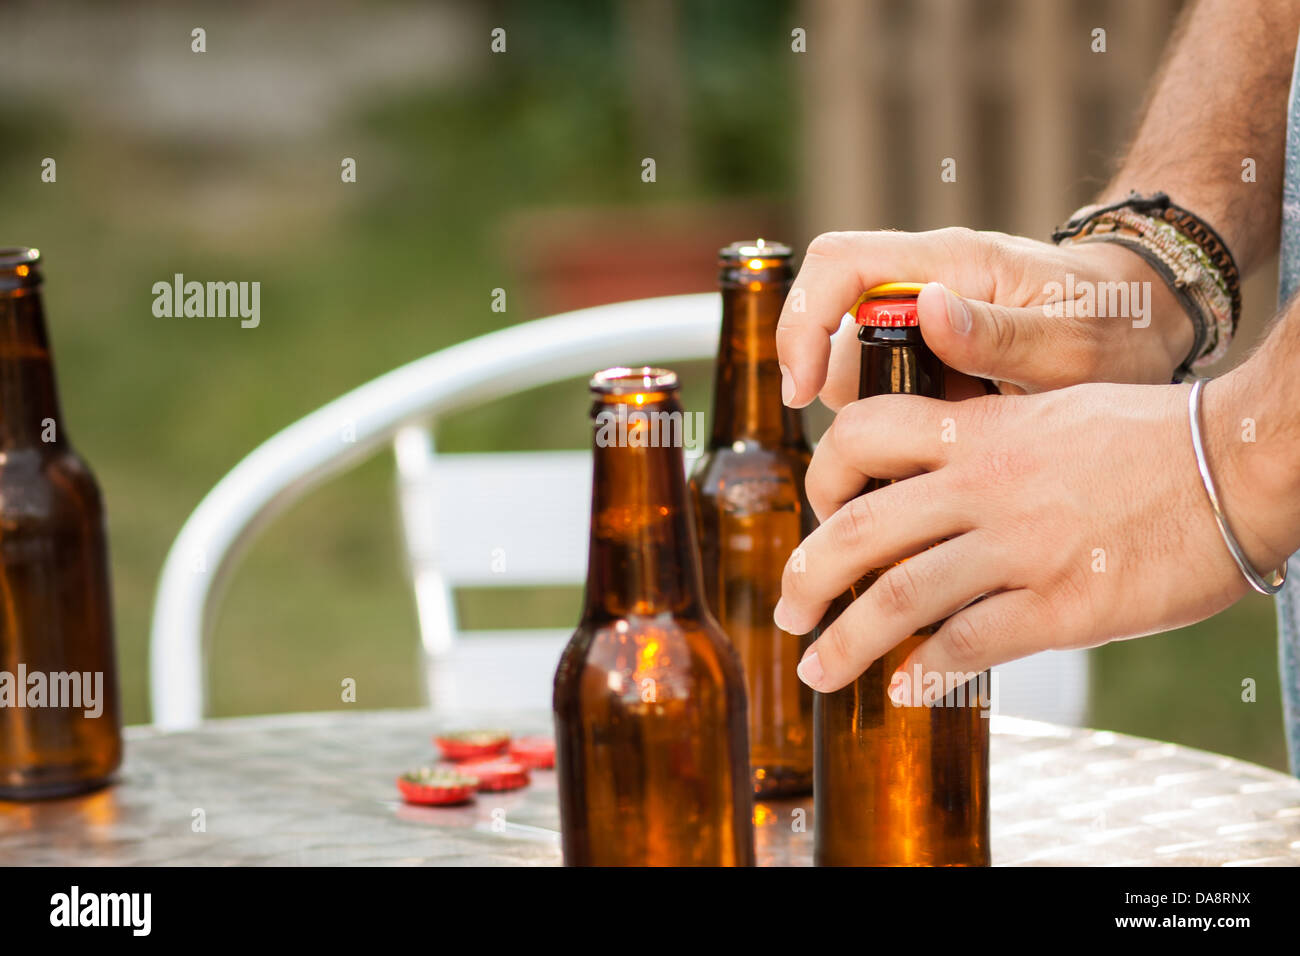 Hand opening a beer bottle in a terrace outdoors Stock Photo